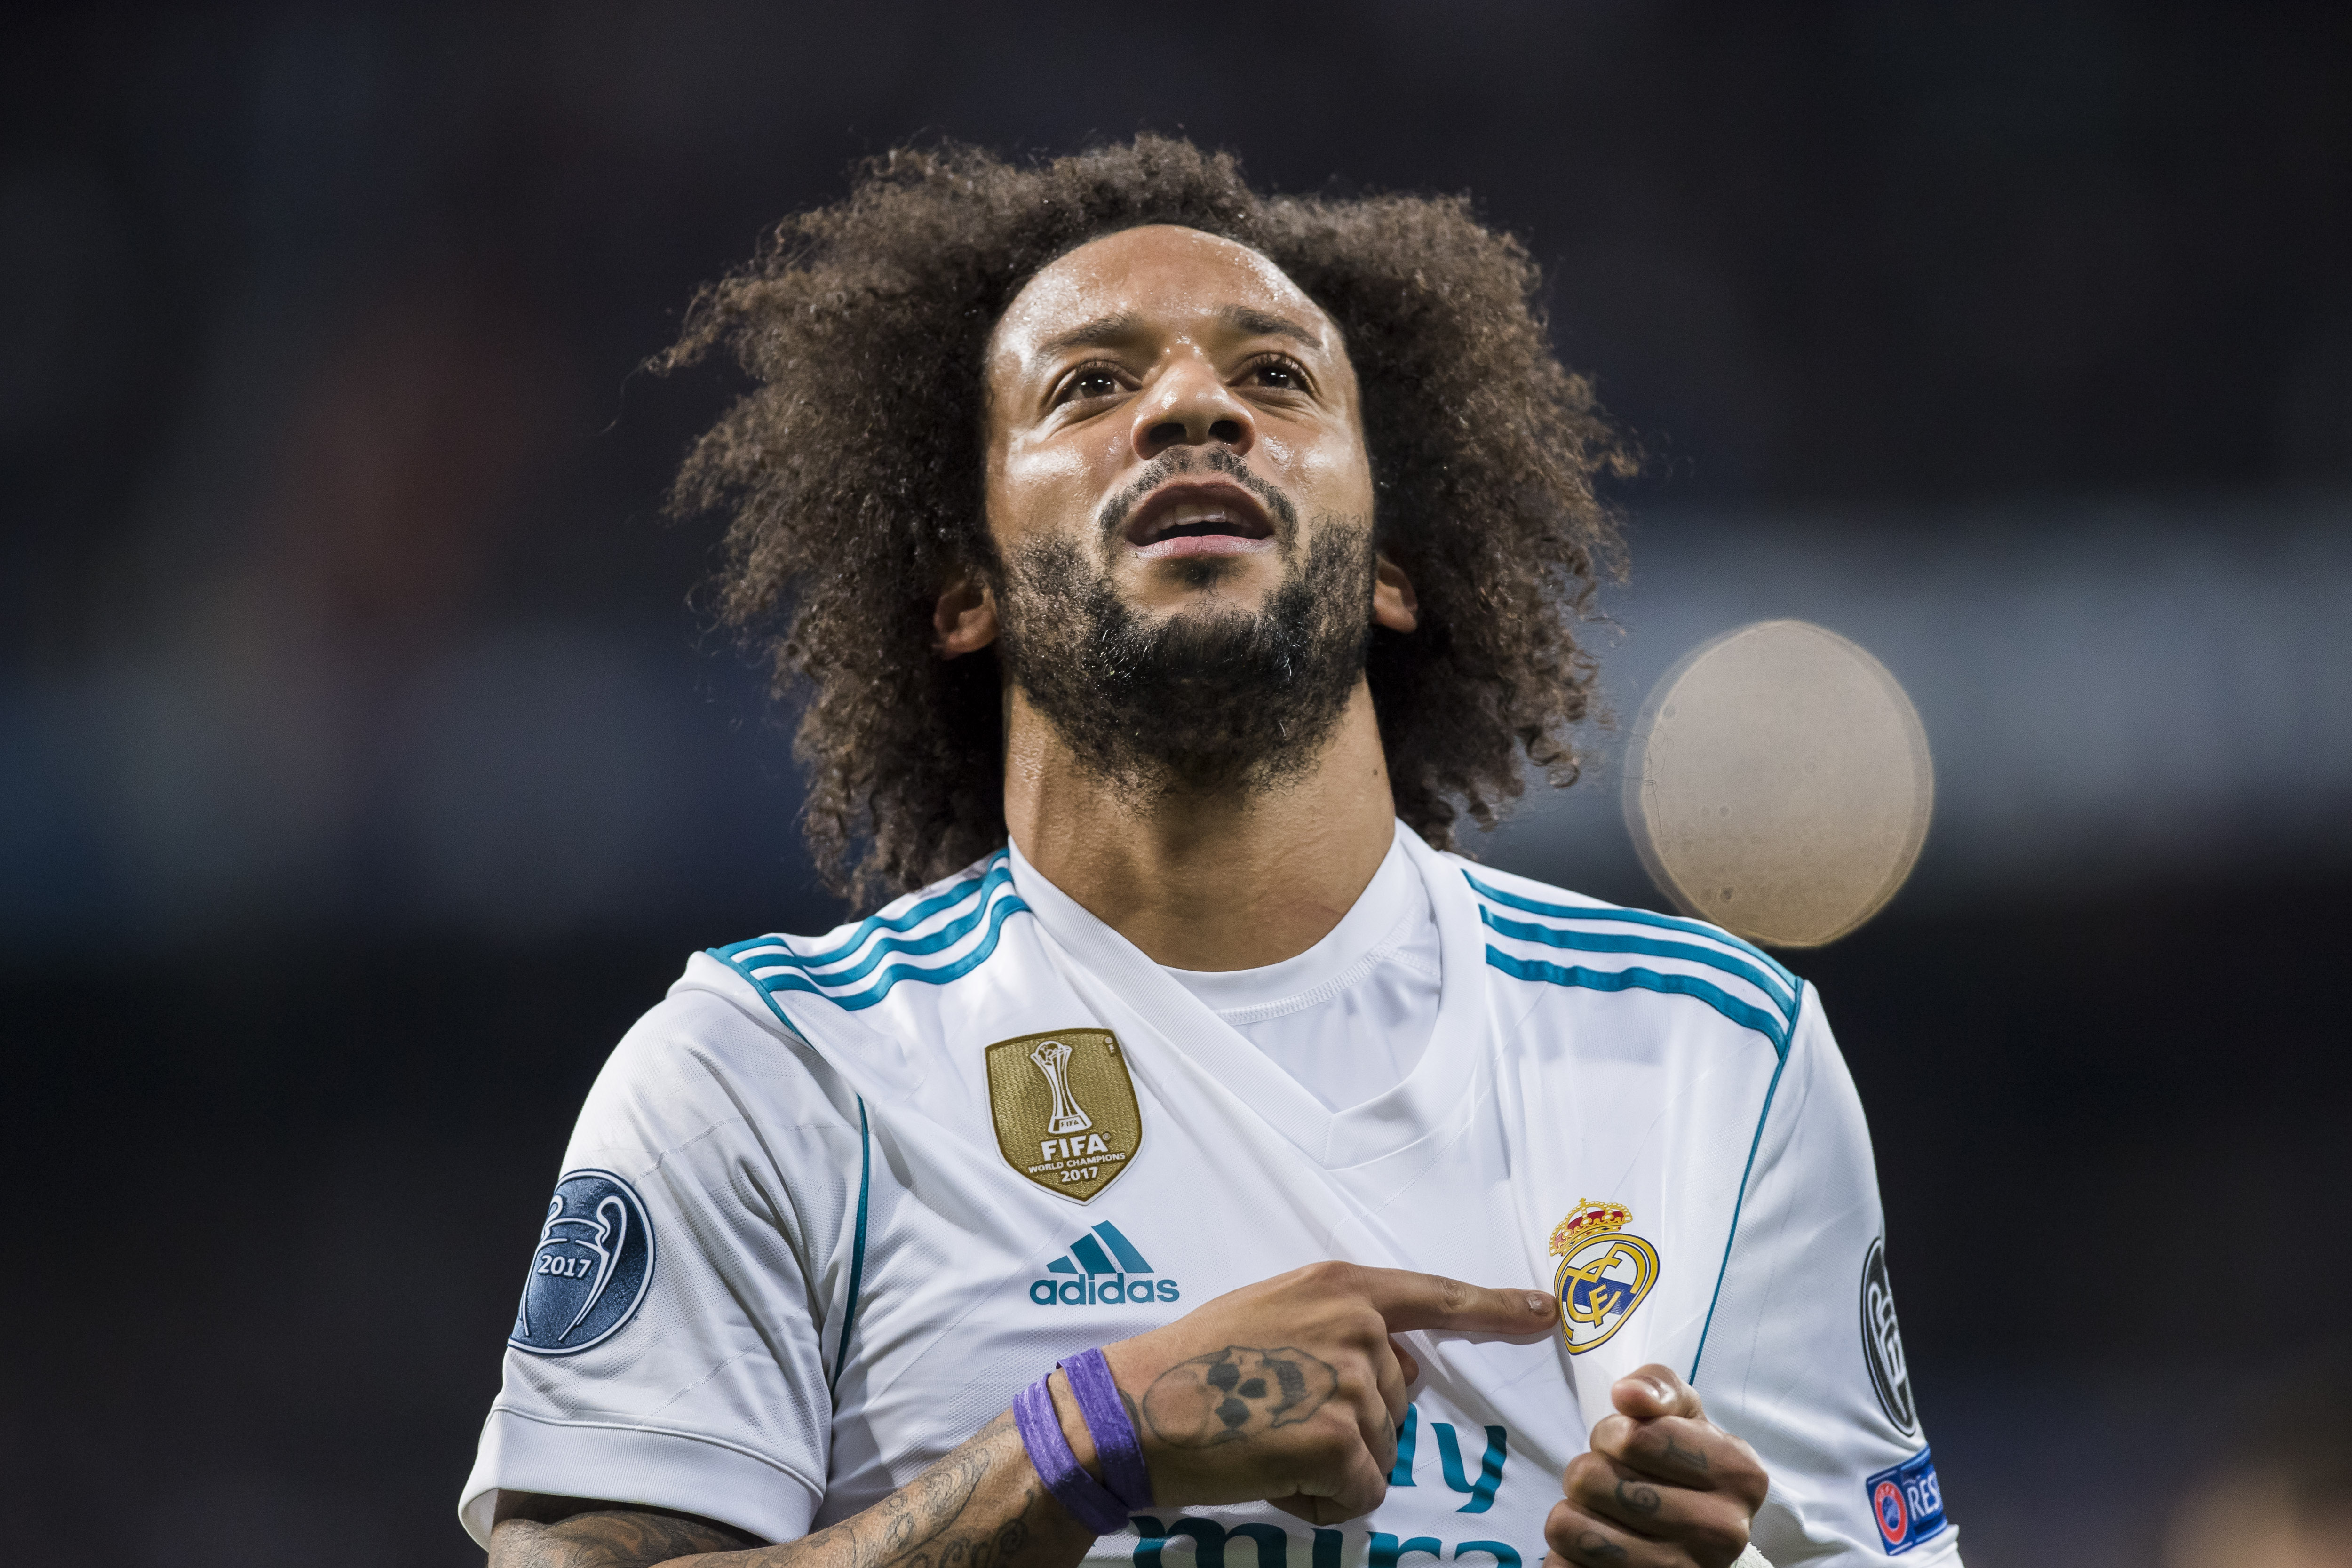 Marcelo celebrates during Real Madrid's Champions League first leg match against Paris Saint-Germain in February 2018.